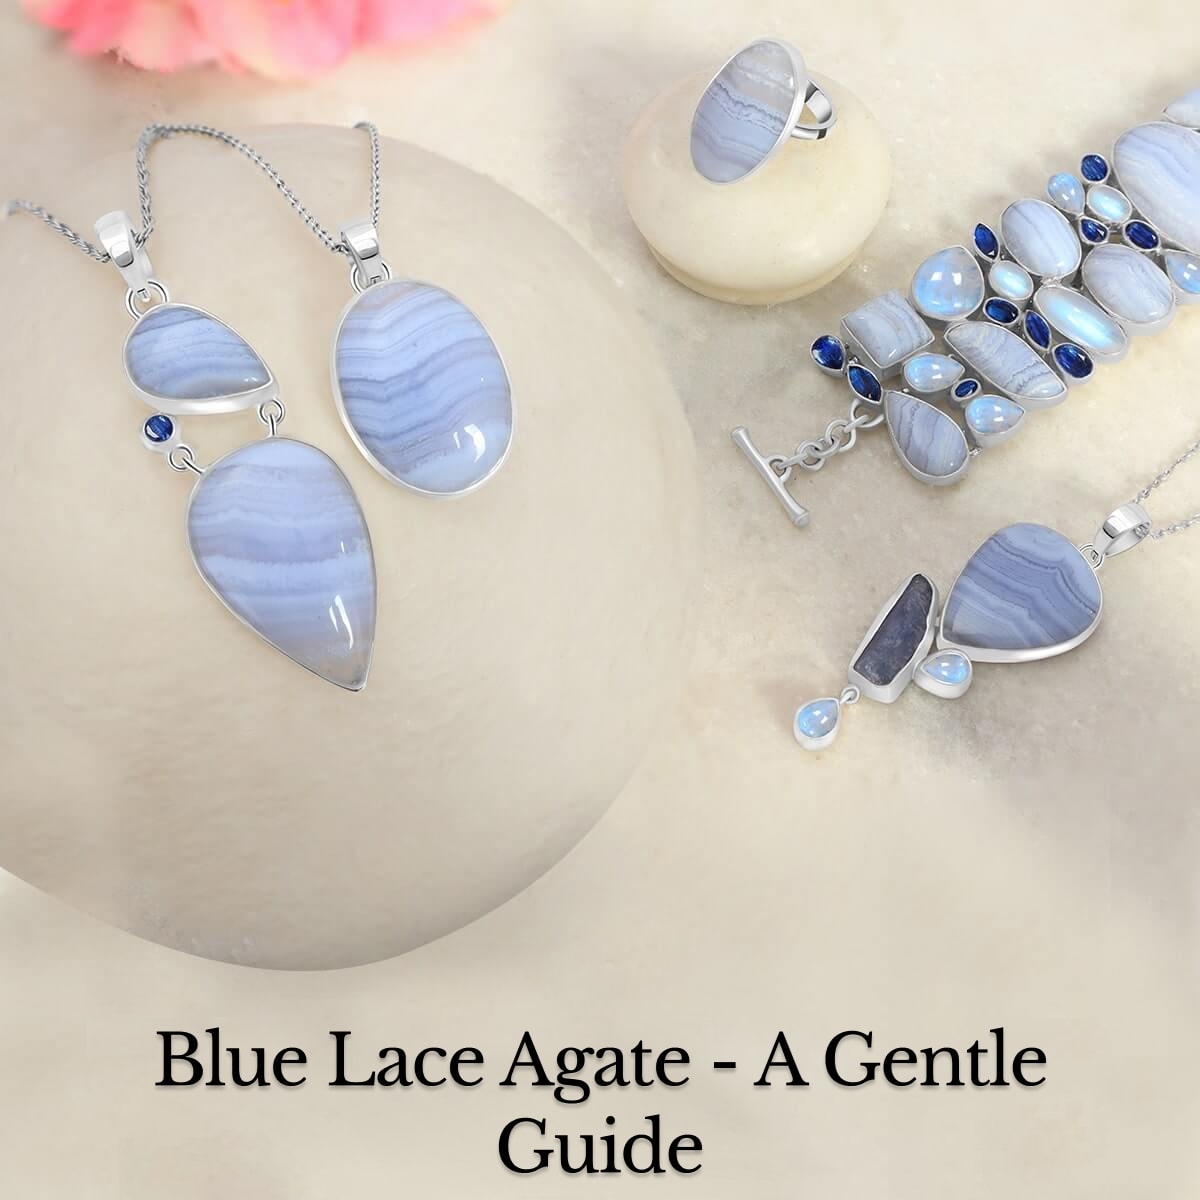 How to use blue lace agate